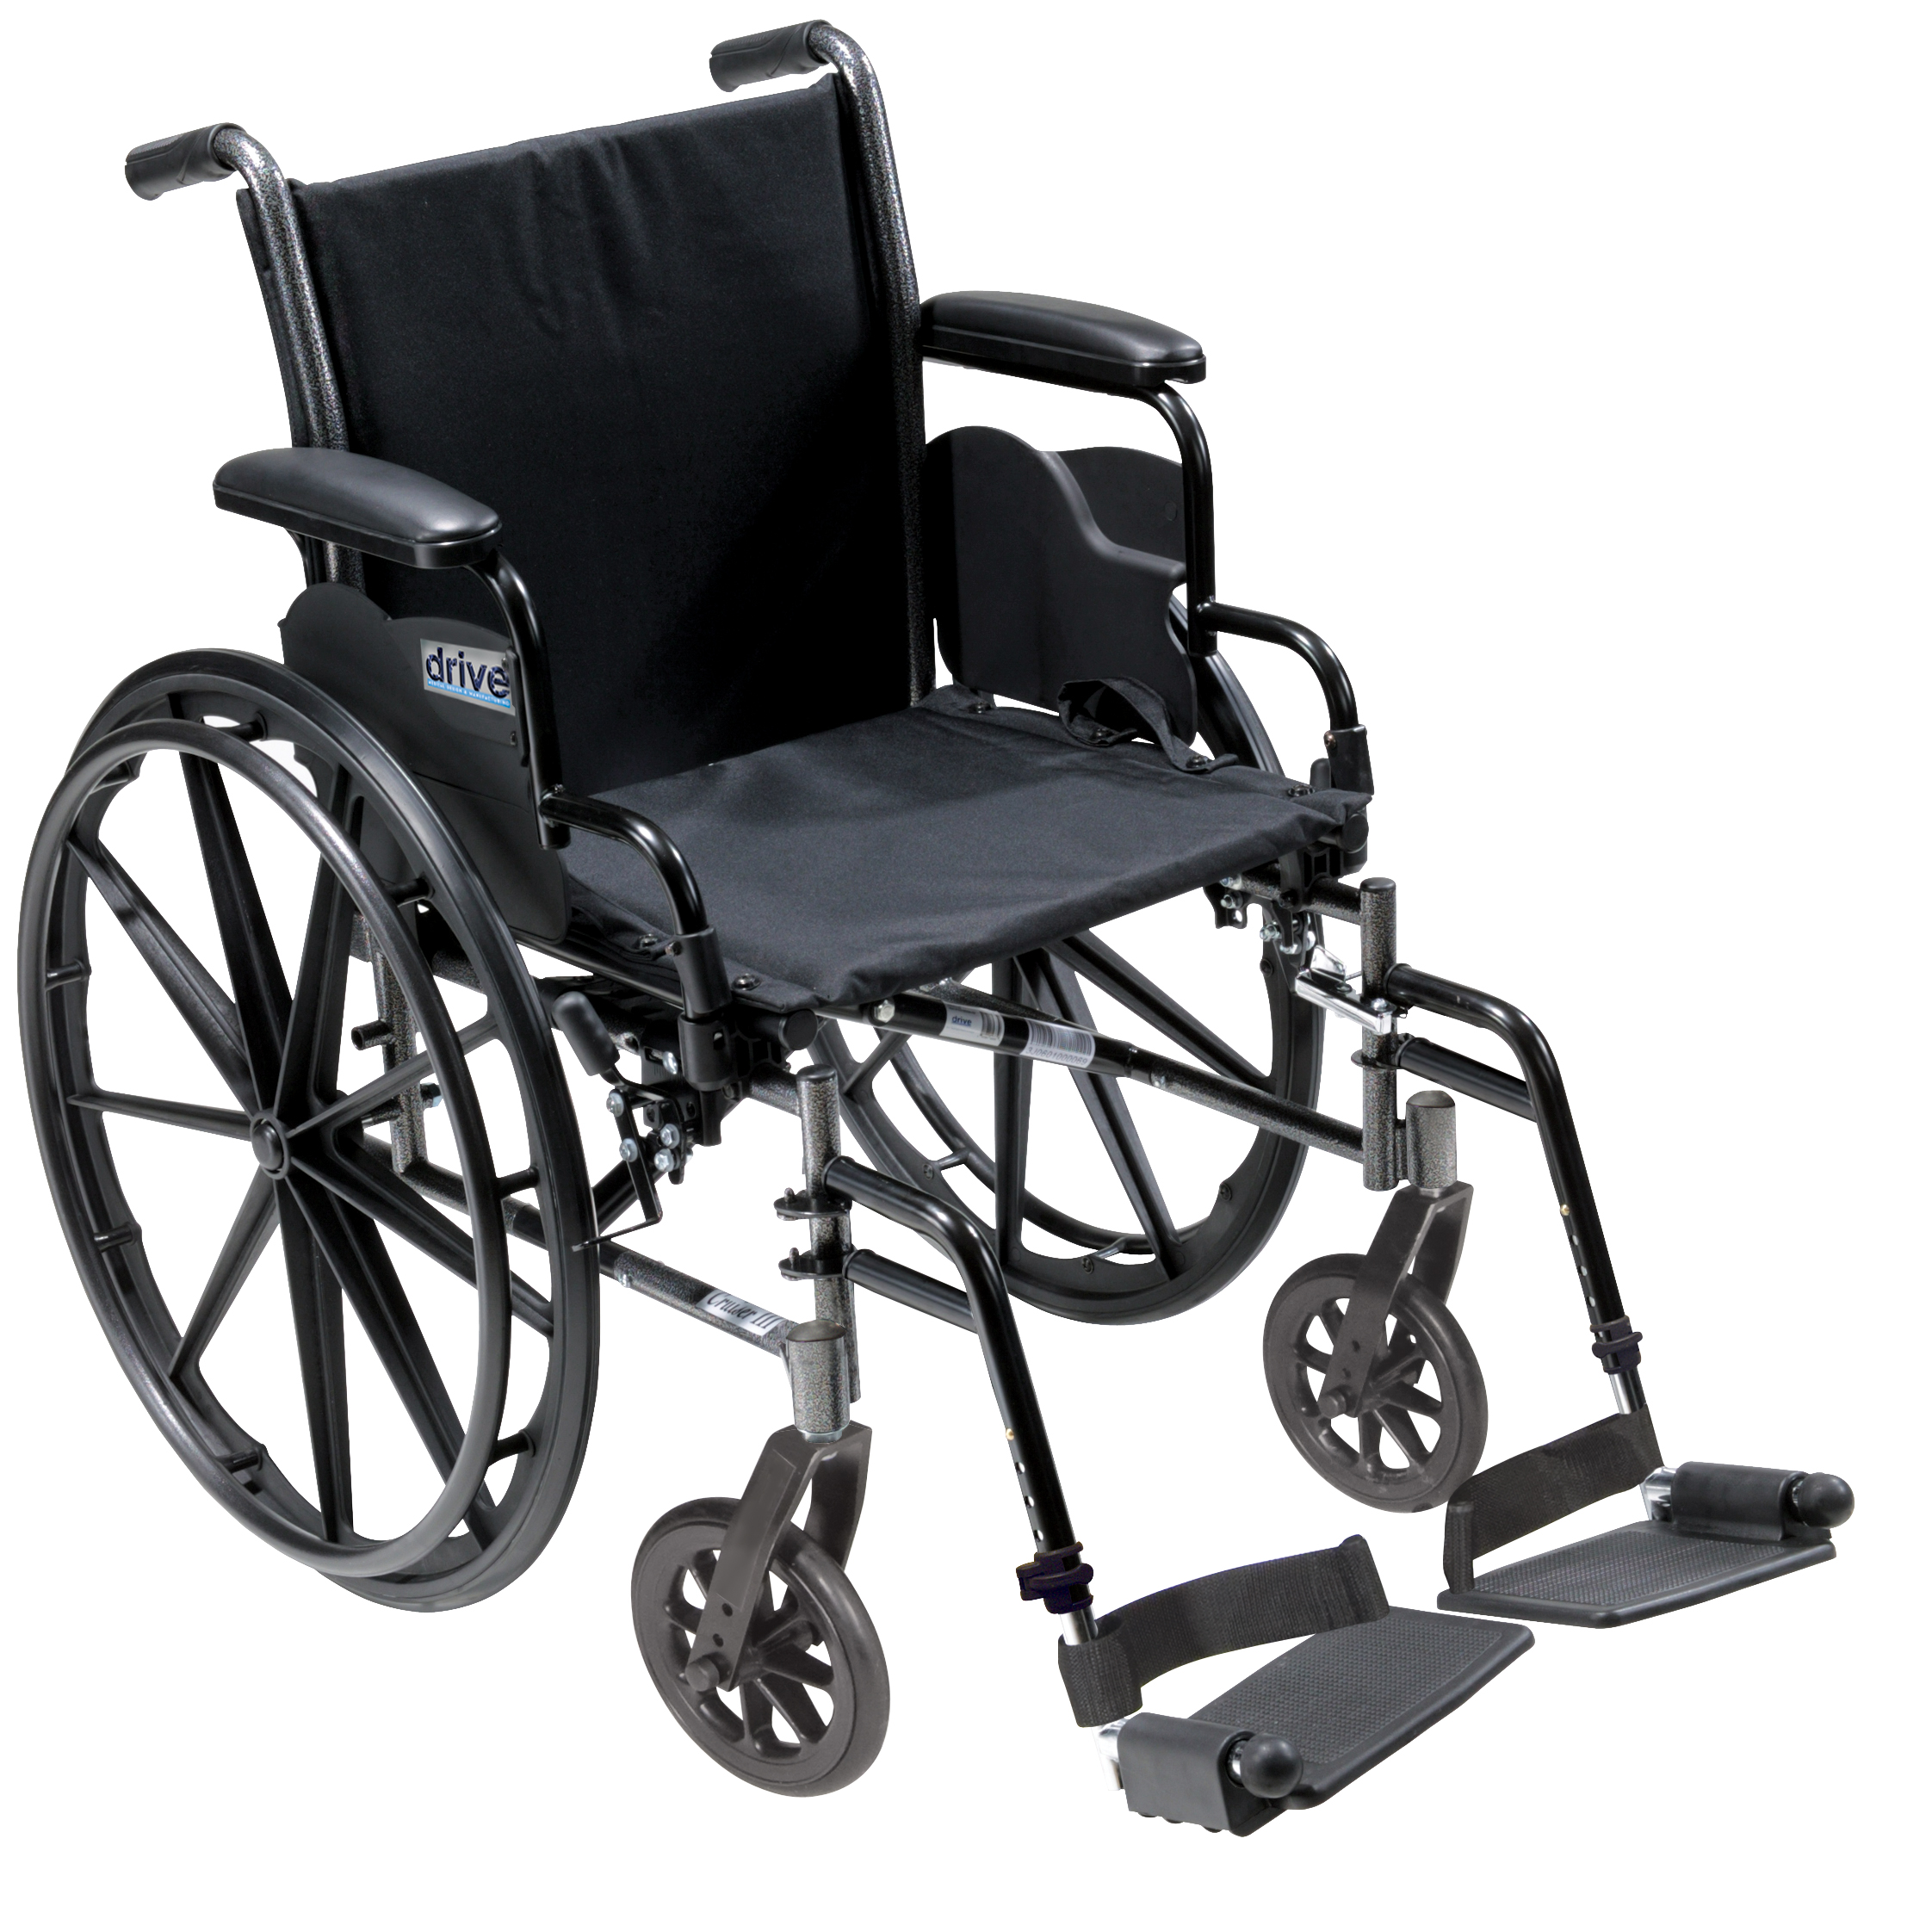 Drive Medical Cruiser III Light Weight Wheelchair with Flip Back Removable Arms, Desk Arms, Swing away Footrests, 18" Seat - image 2 of 2